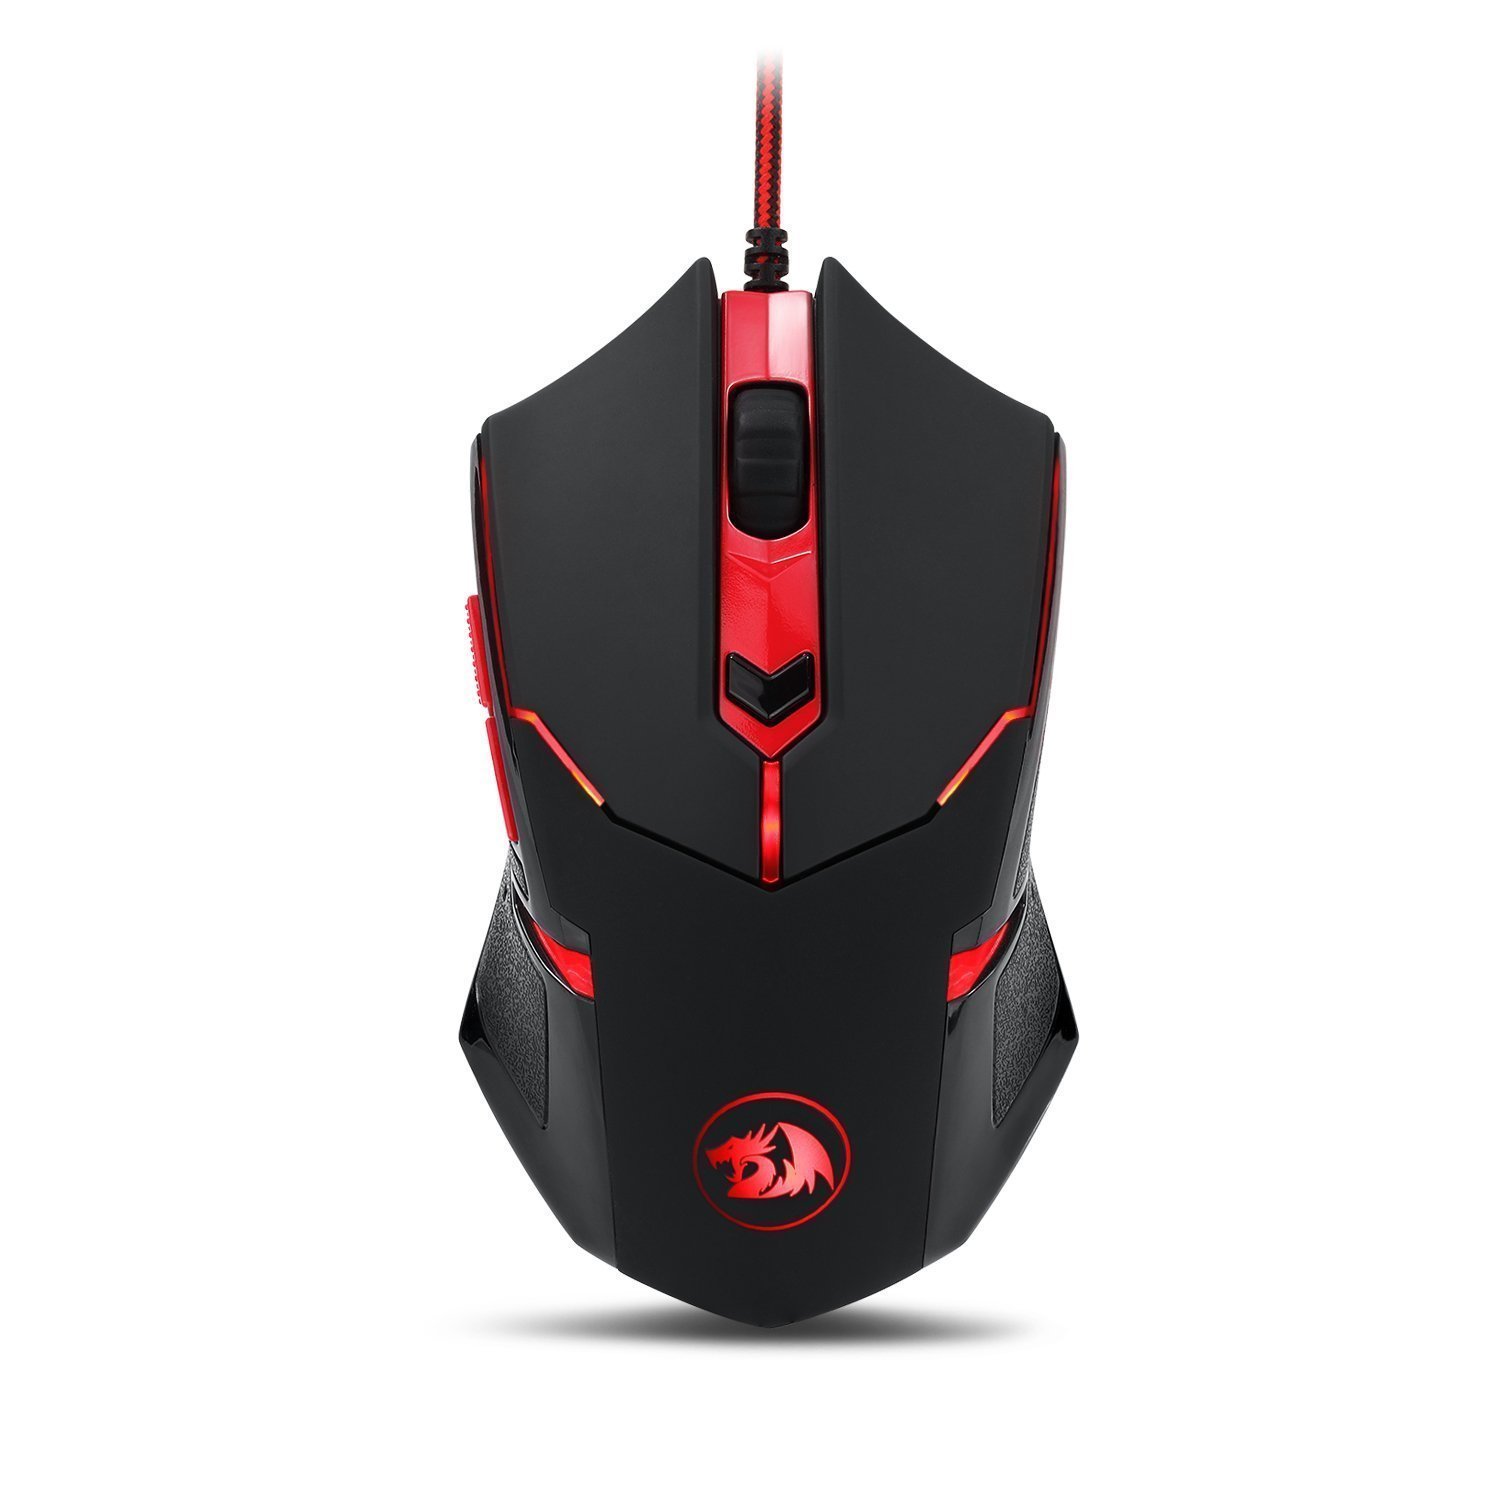 Red Dragon mouse — Not Your Parents Basement